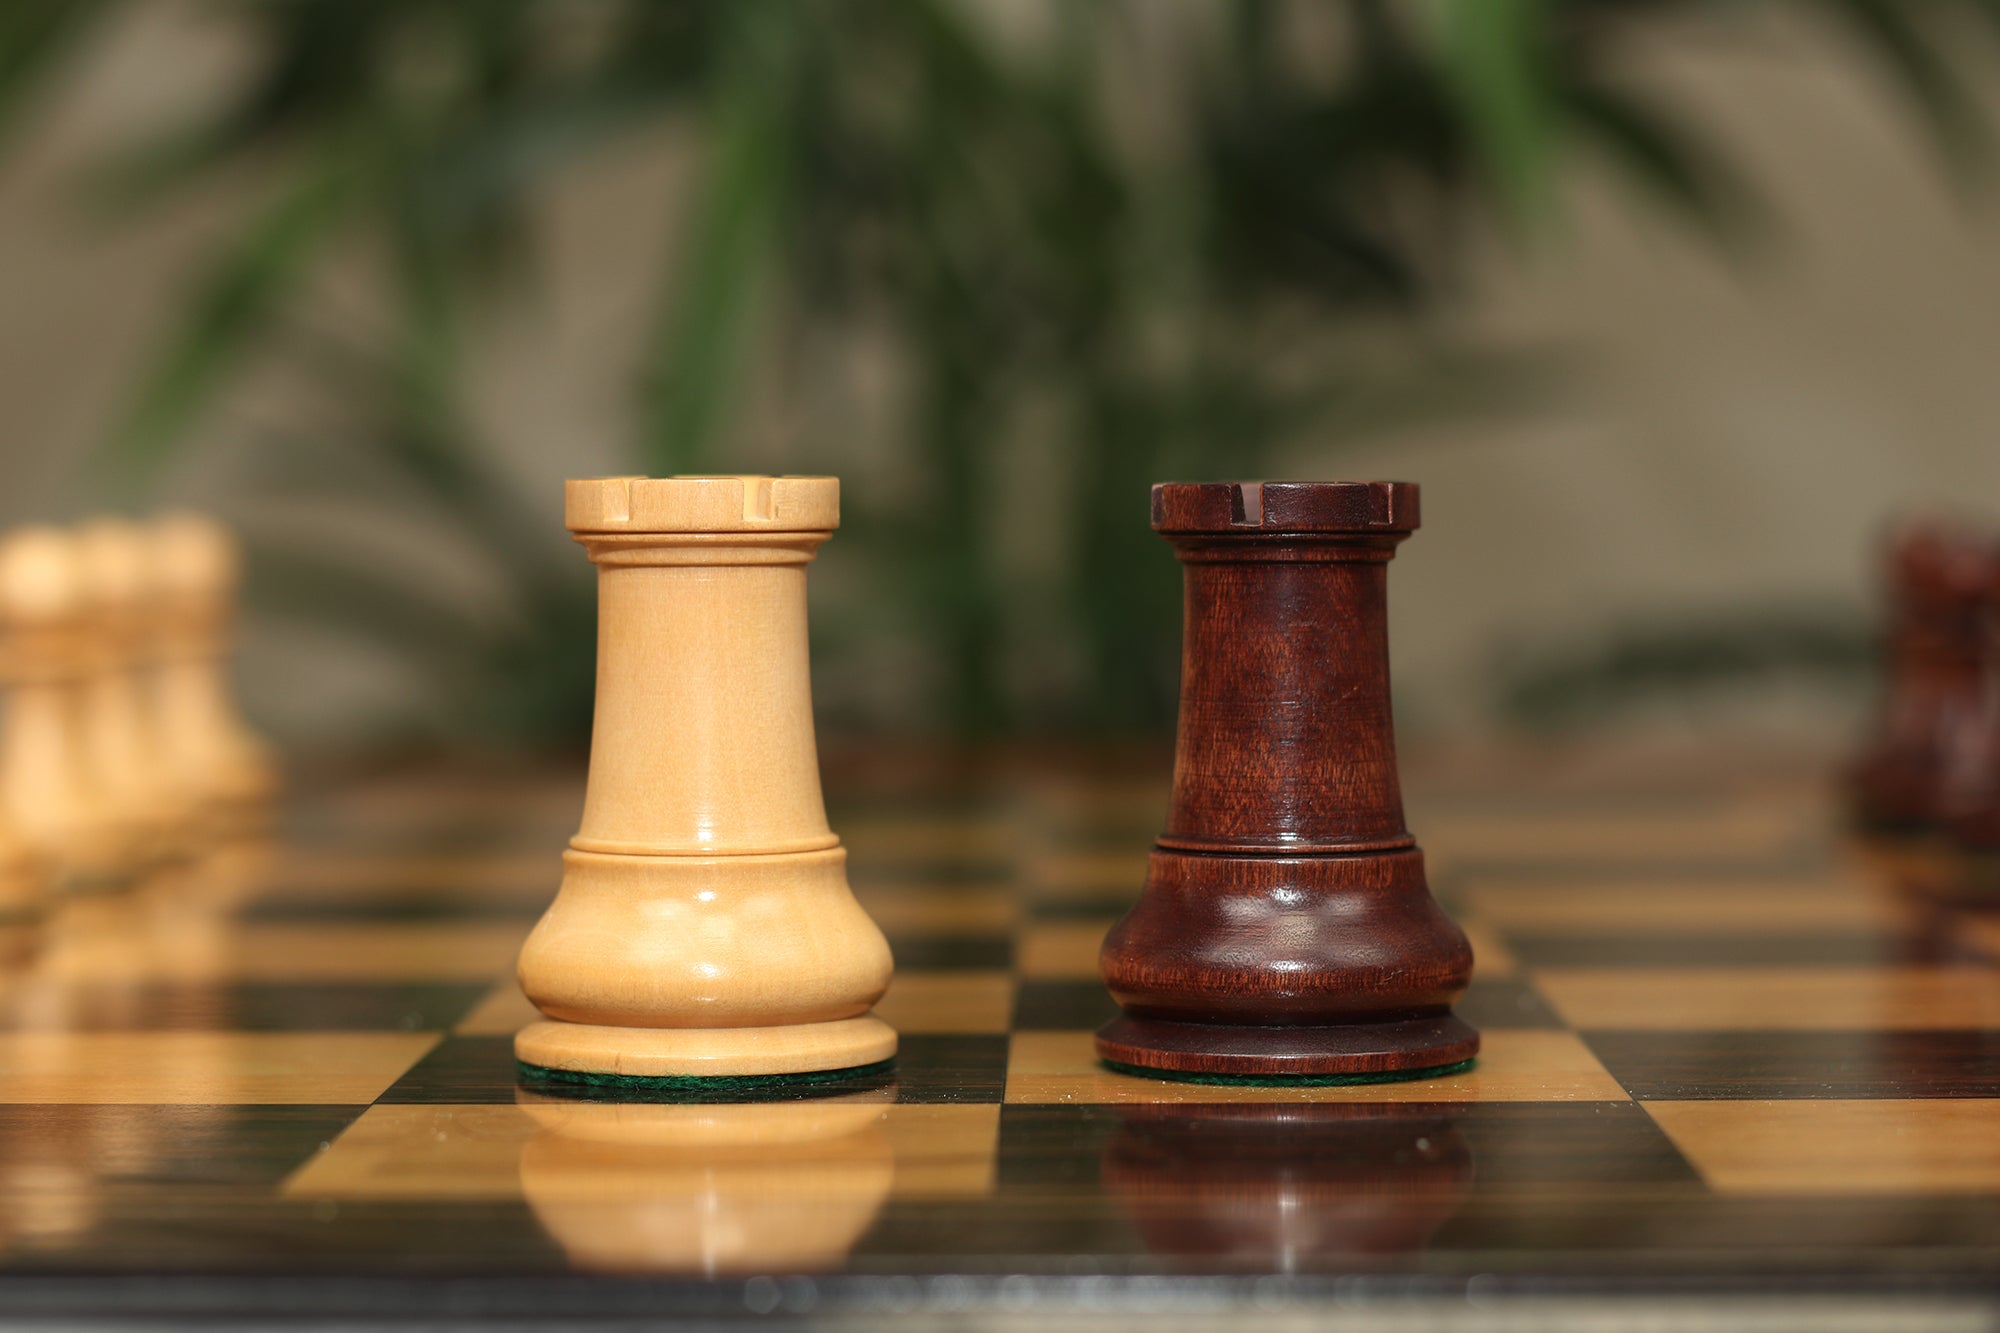 Nathaniel 1849 Reproduction Vintage 4.4" Chess Pieces Natural/Mahogany Stained Boxwood